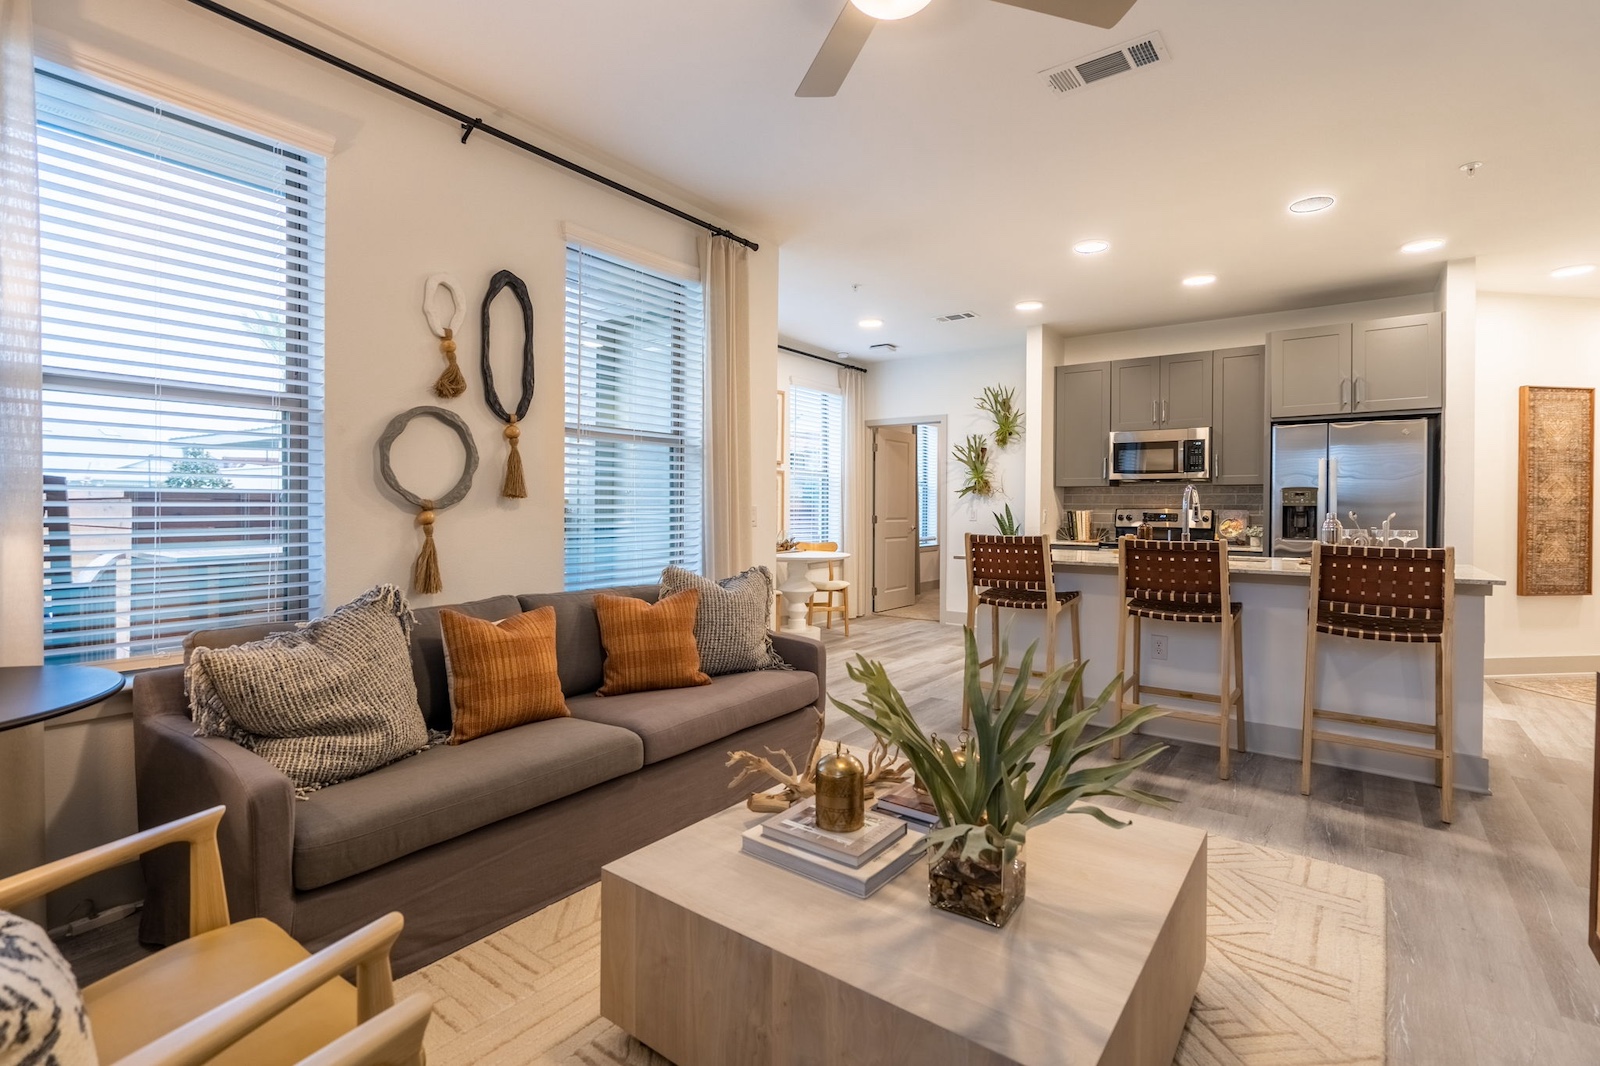 Kitchen and living room with wood-style plank flooring at our apartments near Cypress.